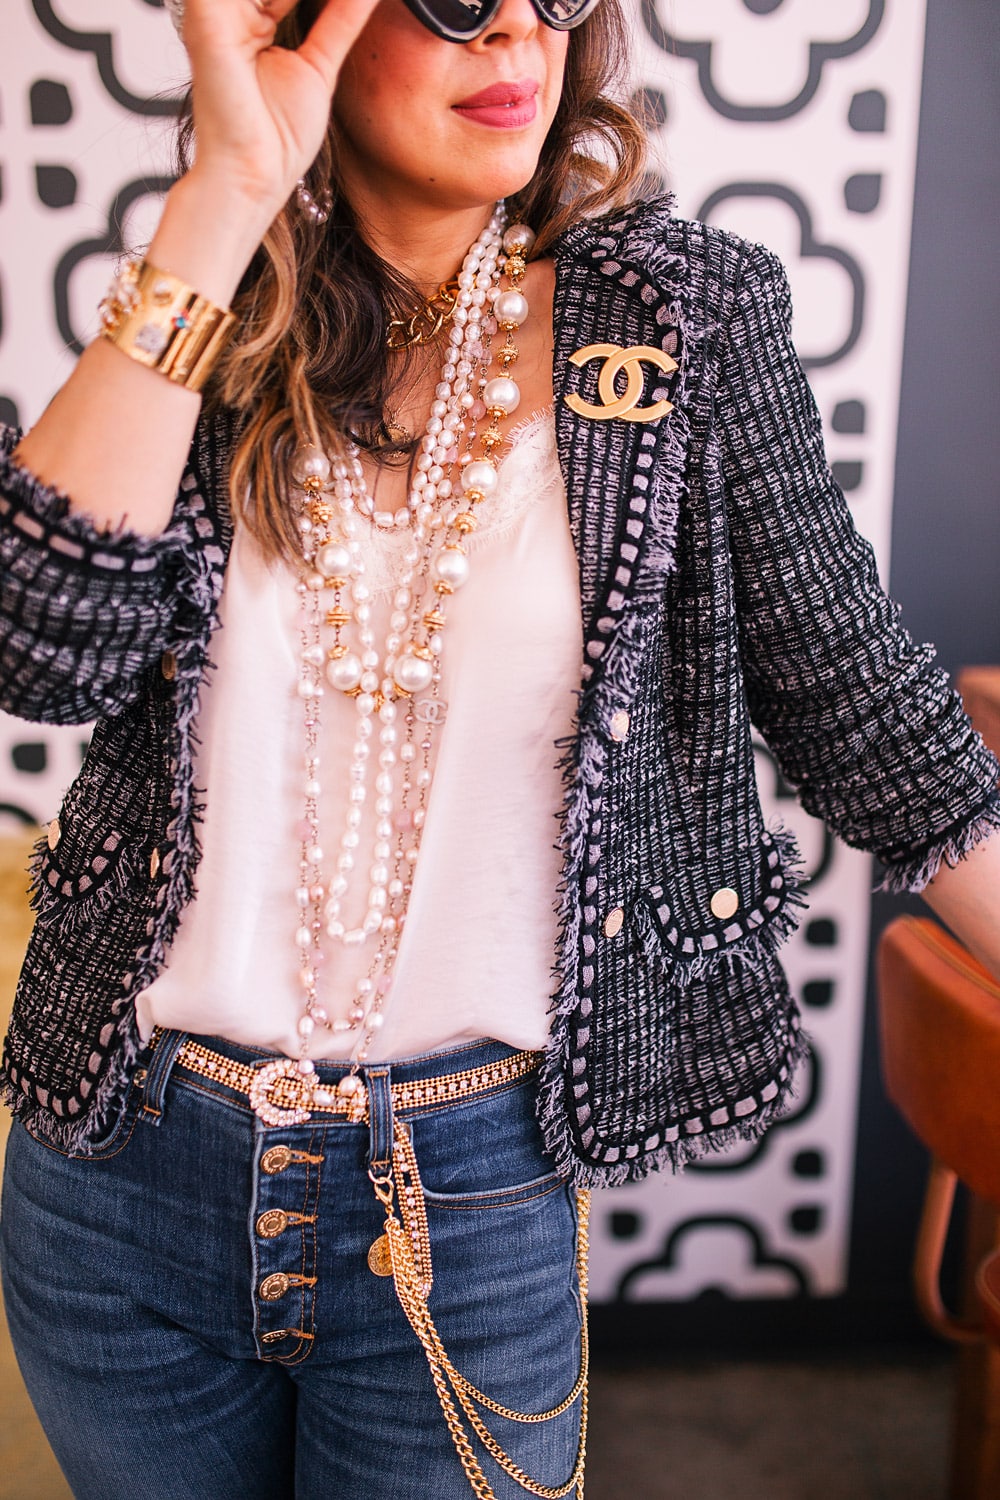 style of sam in misook tweed jacket, chanel brooch and pearl necklaces, veronica beard jeans with chains and rhinestone belt